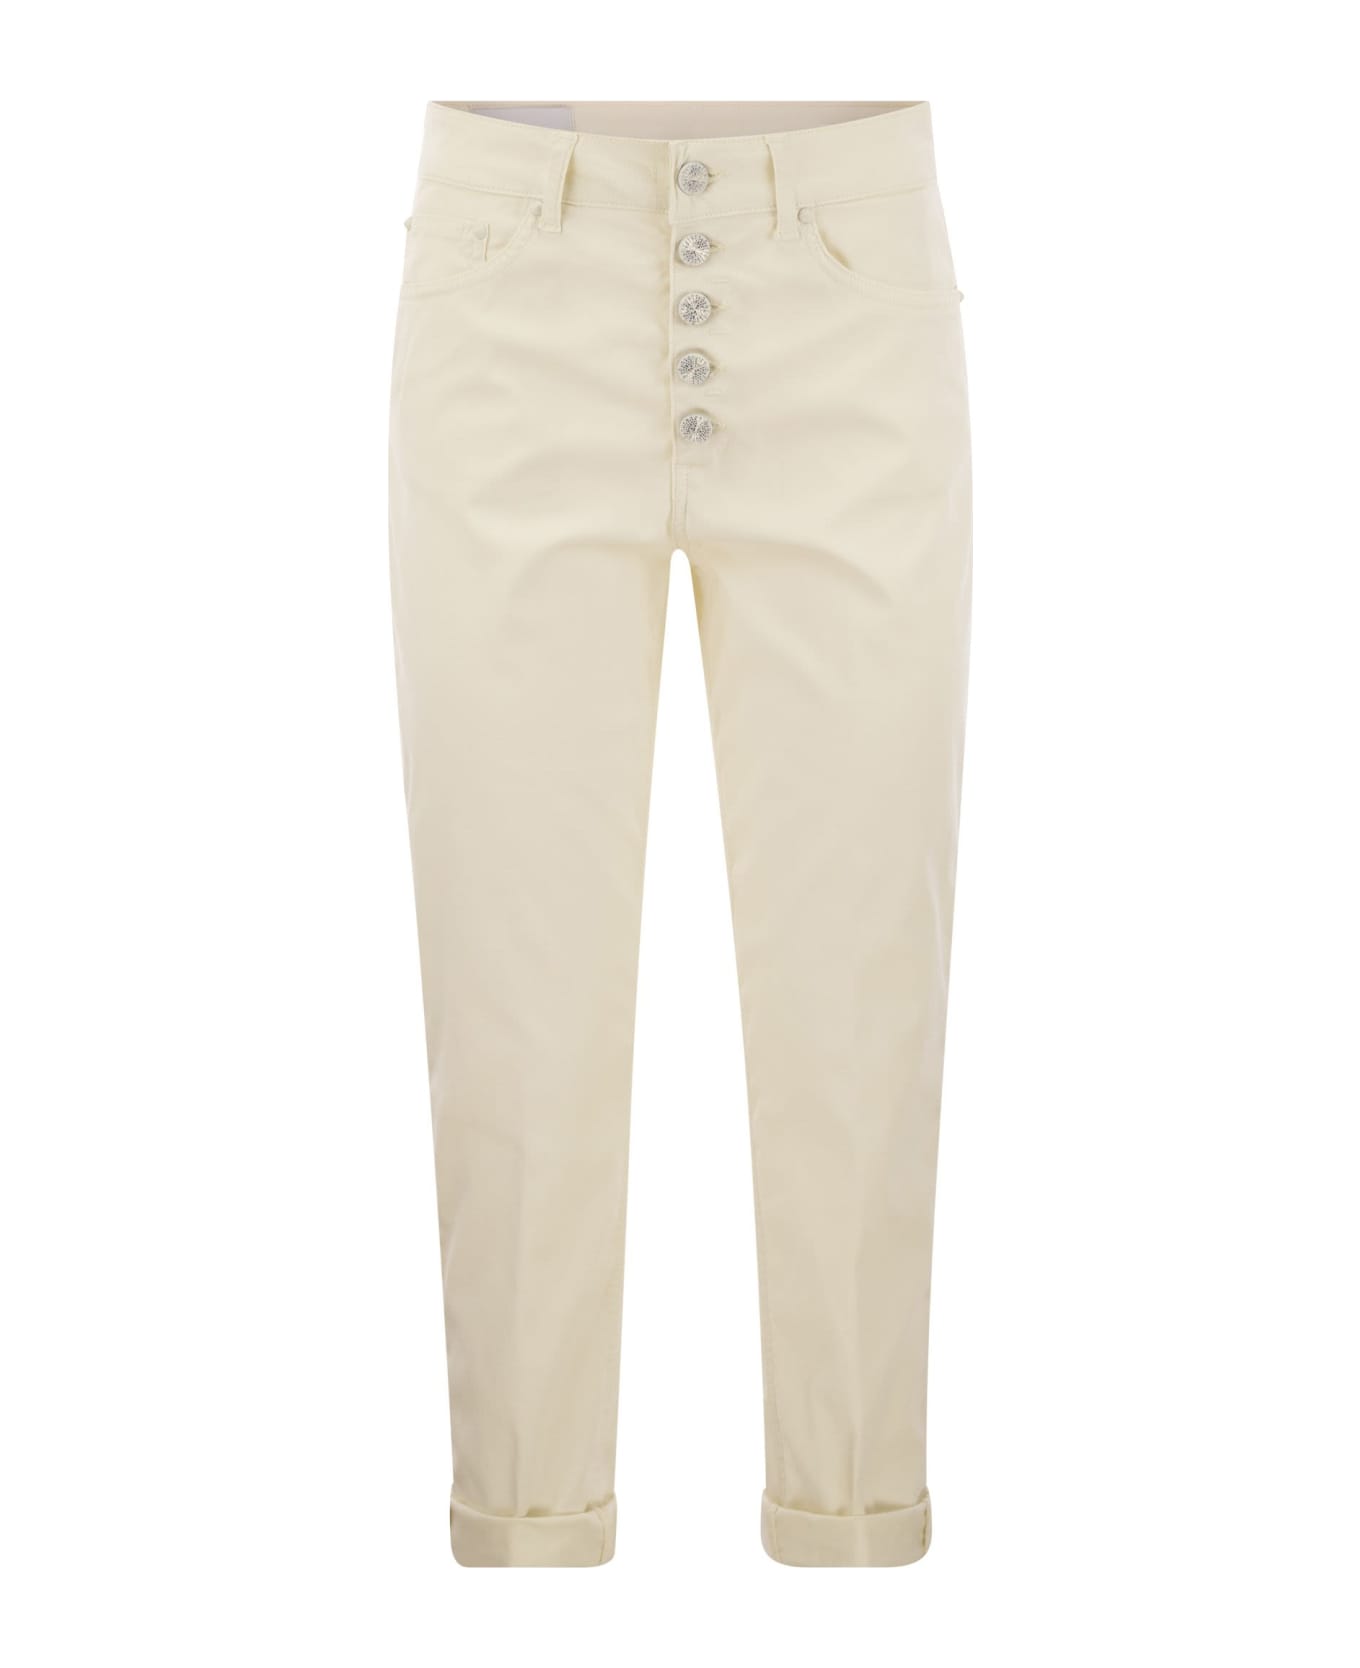 Dondup Cream-colored Jeans - Butter